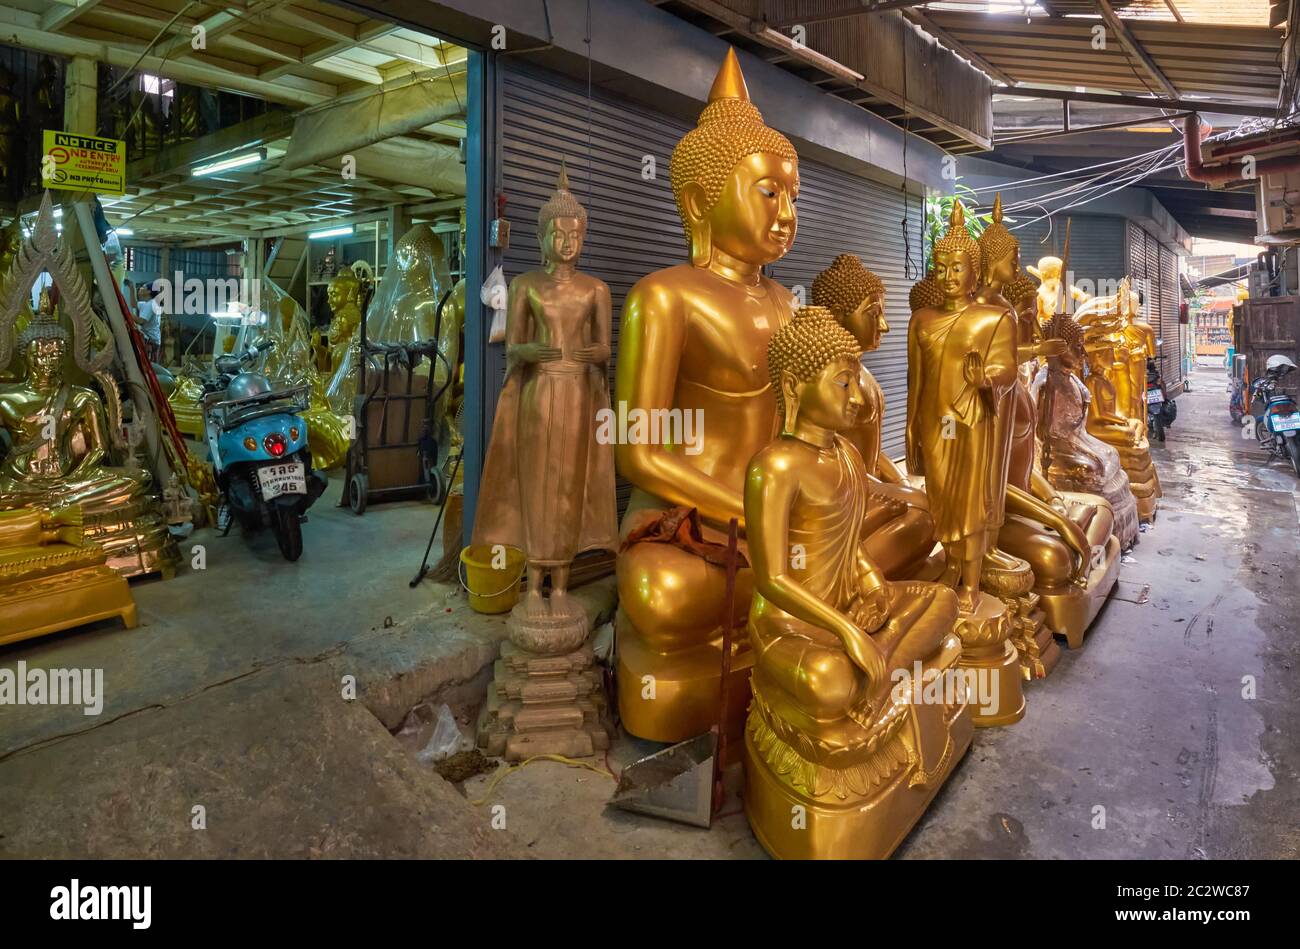 Buddha statues stand in front of a factory for Buddha statues and other religious objects in a side lane off Bamrung Muang Road, Bangkok, Thailand Stock Photo